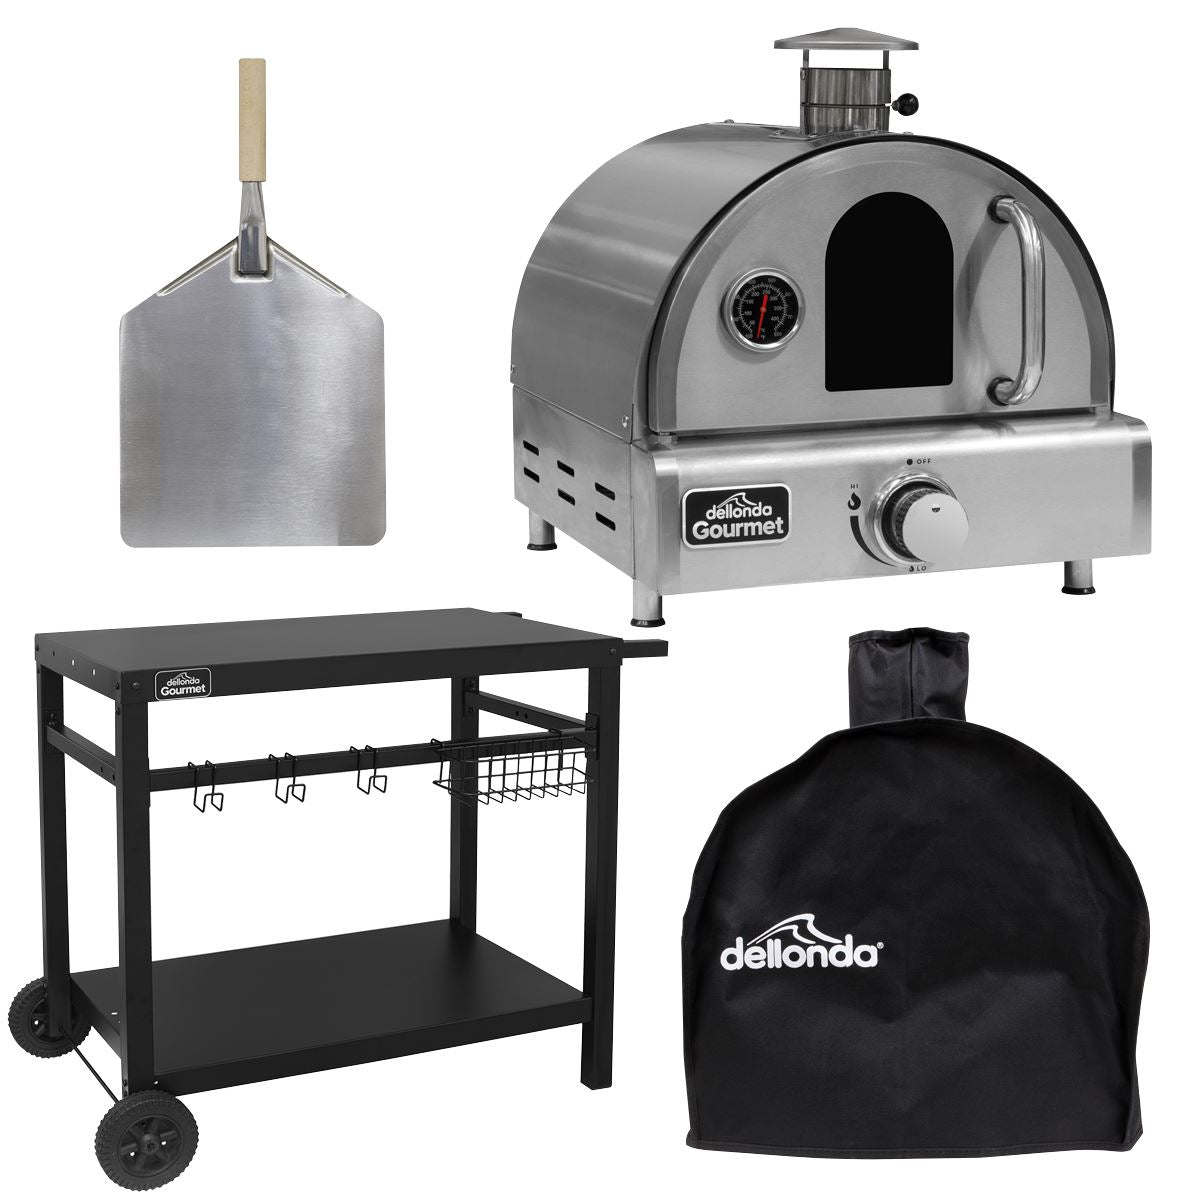 Dellonda Outdoor Tabletop Gas Pizza Oven with Pizza Peel & Trolley